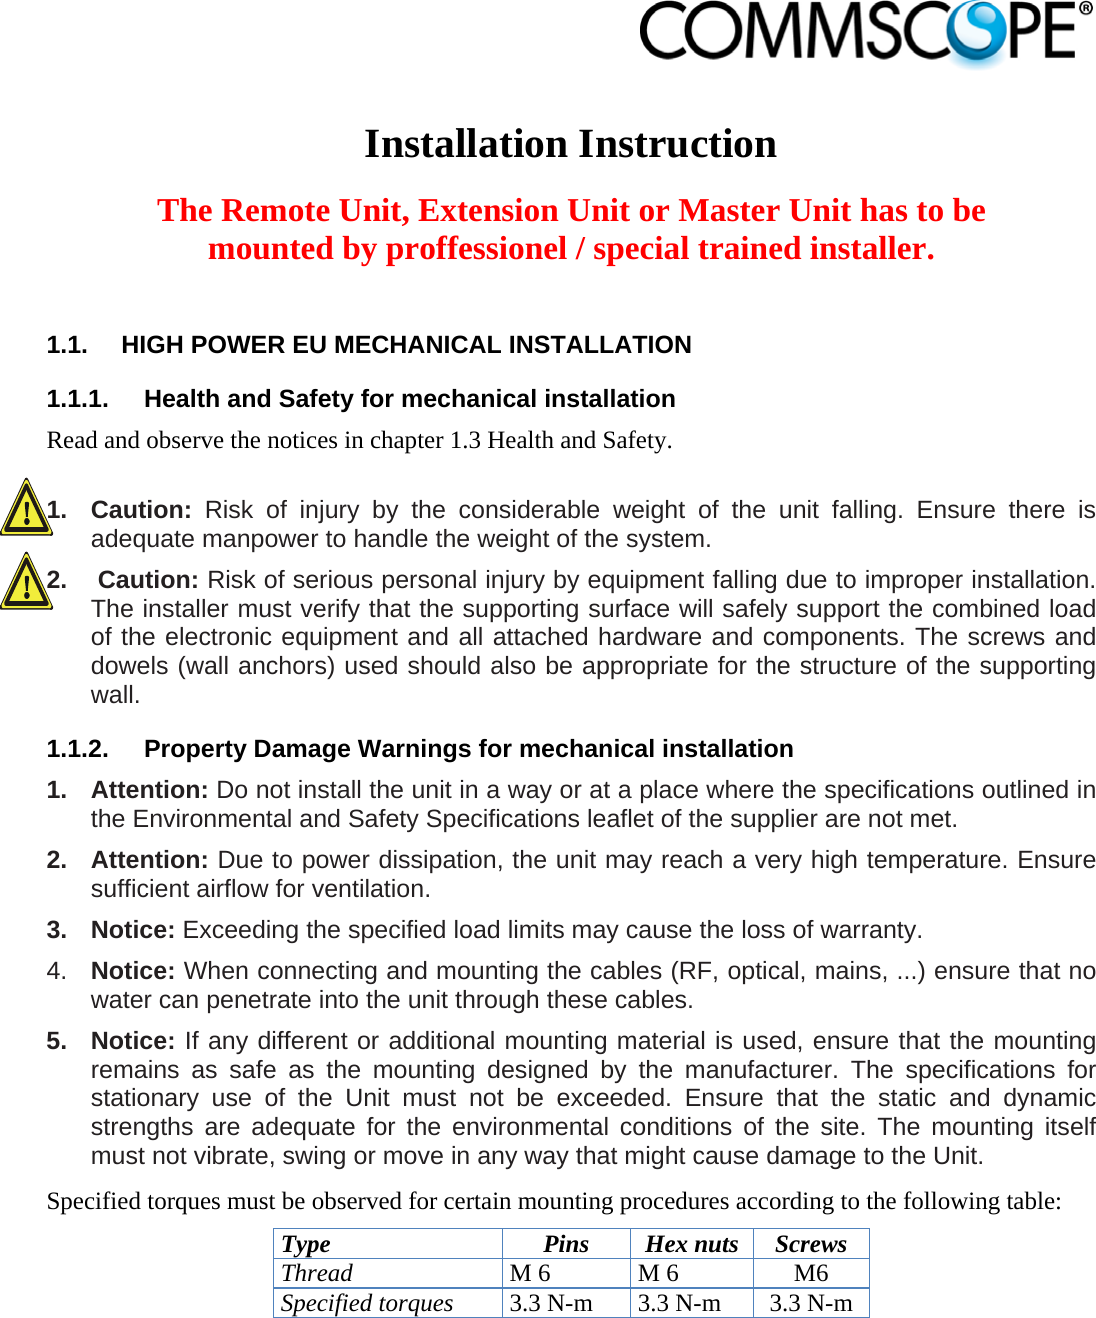                             Installation Instruction  The Remote Unit, Extension Unit or Master Unit has to be mounted by proffessionel / special trained installer.  1.1.  HIGH POWER EU MECHANICAL INSTALLATION 1.1.1.  Health and Safety for mechanical installation Read and observe the notices in chapter 1.3 Health and Safety.  1. Caution: Risk of injury by the considerable weight of the unit falling. Ensure there is adequate manpower to handle the weight of the system. 2.   Caution: Risk of serious personal injury by equipment falling due to improper installation. The installer must verify that the supporting surface will safely support the combined load of the electronic equipment and all attached hardware and components. The screws and dowels (wall anchors) used should also be appropriate for the structure of the supporting wall. 1.1.2.  Property Damage Warnings for mechanical installation 1. Attention: Do not install the unit in a way or at a place where the specifications outlined in the Environmental and Safety Specifications leaflet of the supplier are not met. 2. Attention: Due to power dissipation, the unit may reach a very high temperature. Ensure sufficient airflow for ventilation. 3. Notice: Exceeding the specified load limits may cause the loss of warranty. 4.  Notice: When connecting and mounting the cables (RF, optical, mains, ...) ensure that no water can penetrate into the unit through these cables. 5. Notice: If any different or additional mounting material is used, ensure that the mounting remains as safe as the mounting designed by the manufacturer. The specifications for stationary use of the Unit must not be exceeded. Ensure that the static and dynamic strengths are adequate for the environmental conditions of the site. The mounting itself must not vibrate, swing or move in any way that might cause damage to the Unit. Specified torques must be observed for certain mounting procedures according to the following table: Type Pins Hex nuts Screws Thread M 6  M 6  M6 Specified torques 3.3 N-m  3.3 N-m  3.3 N-m  